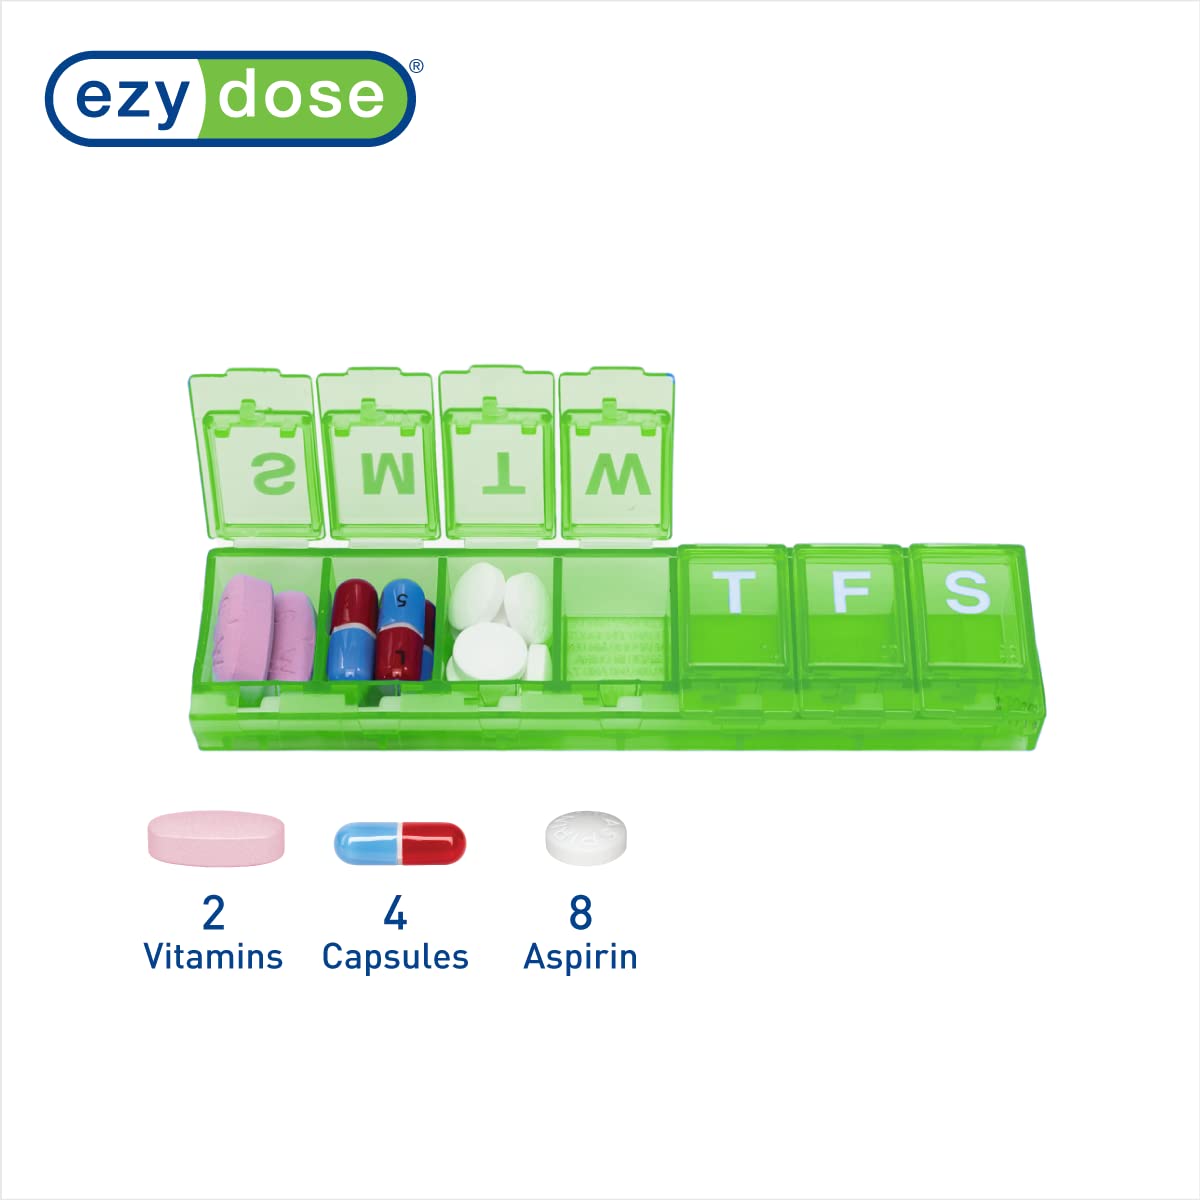 EZY DOSE Weekly (7-Day) Pill Planner, Medicine Case, Vitamin Organizer Box, Small Locking Compartments to Secure Prescription Medication and Prevent Accidental Spilling, Green